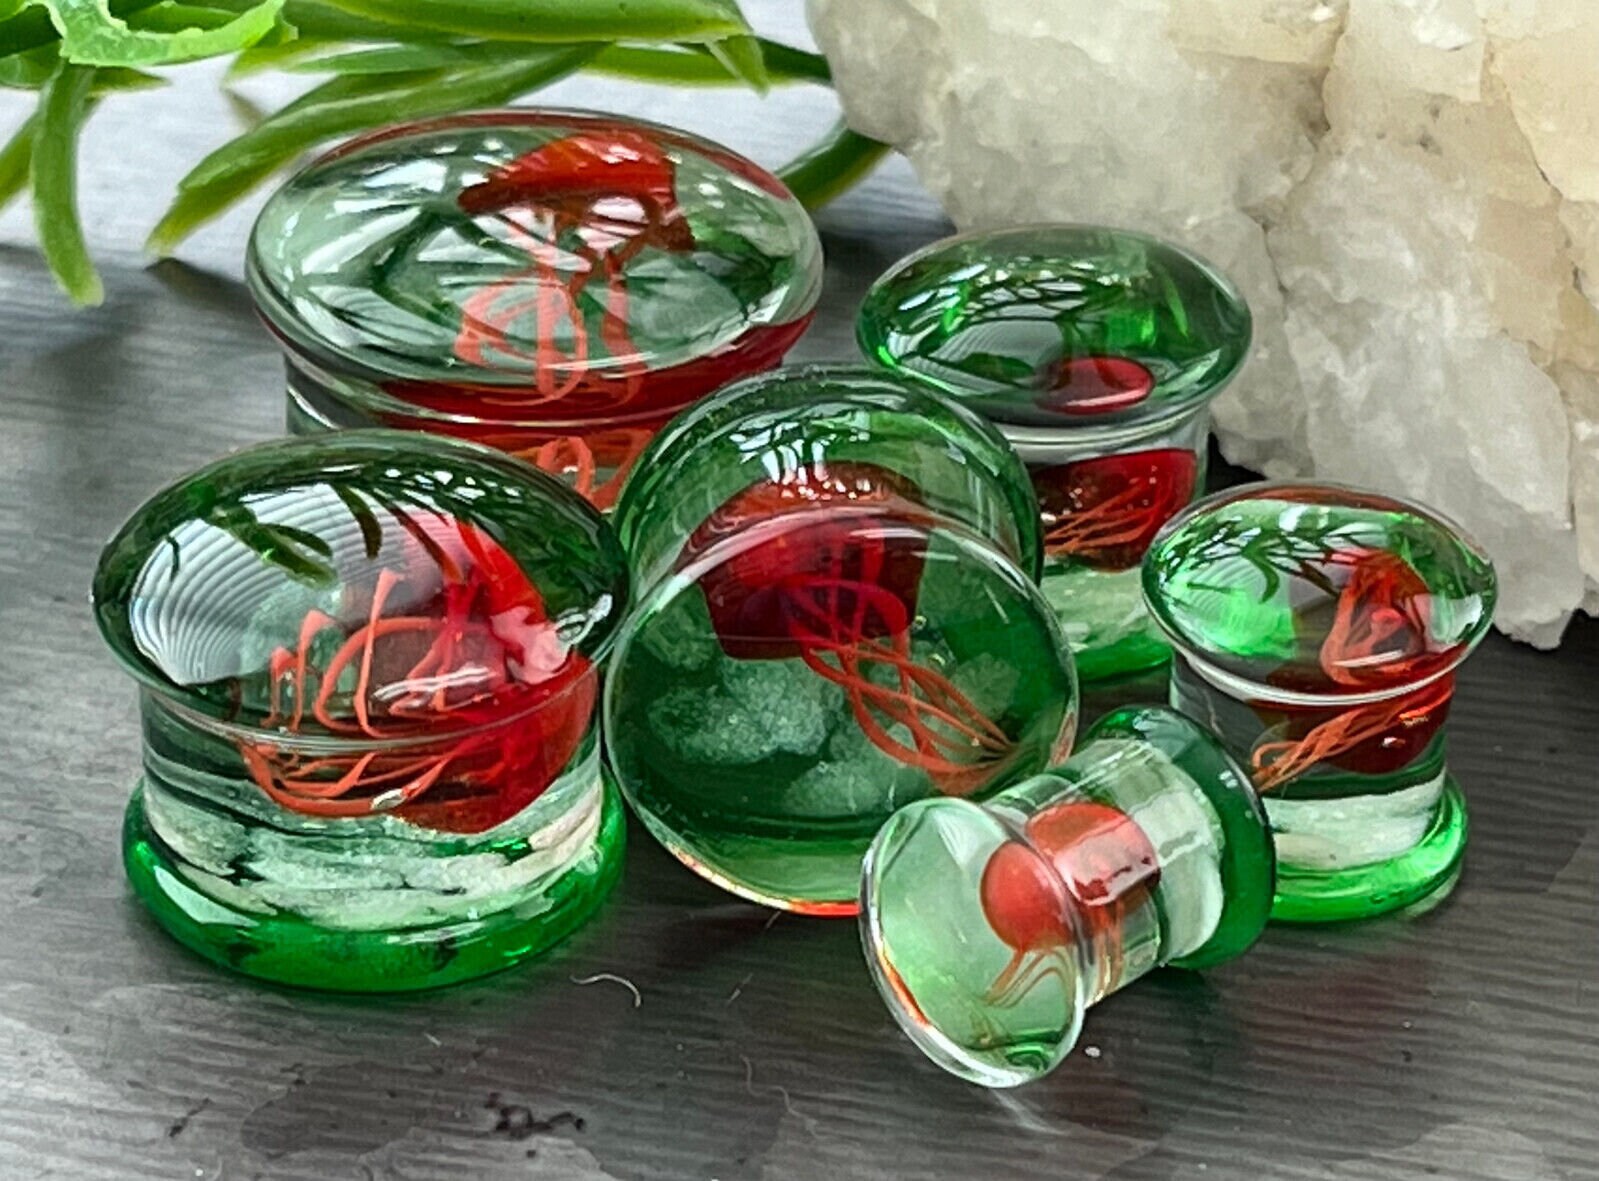 PAIR of Unique Glow in the Dark Floating Red & Green Jellyfish Pyrex Glass Double Flare Plugs - Gauges 0g (8mm) through 1" (25mm) available!